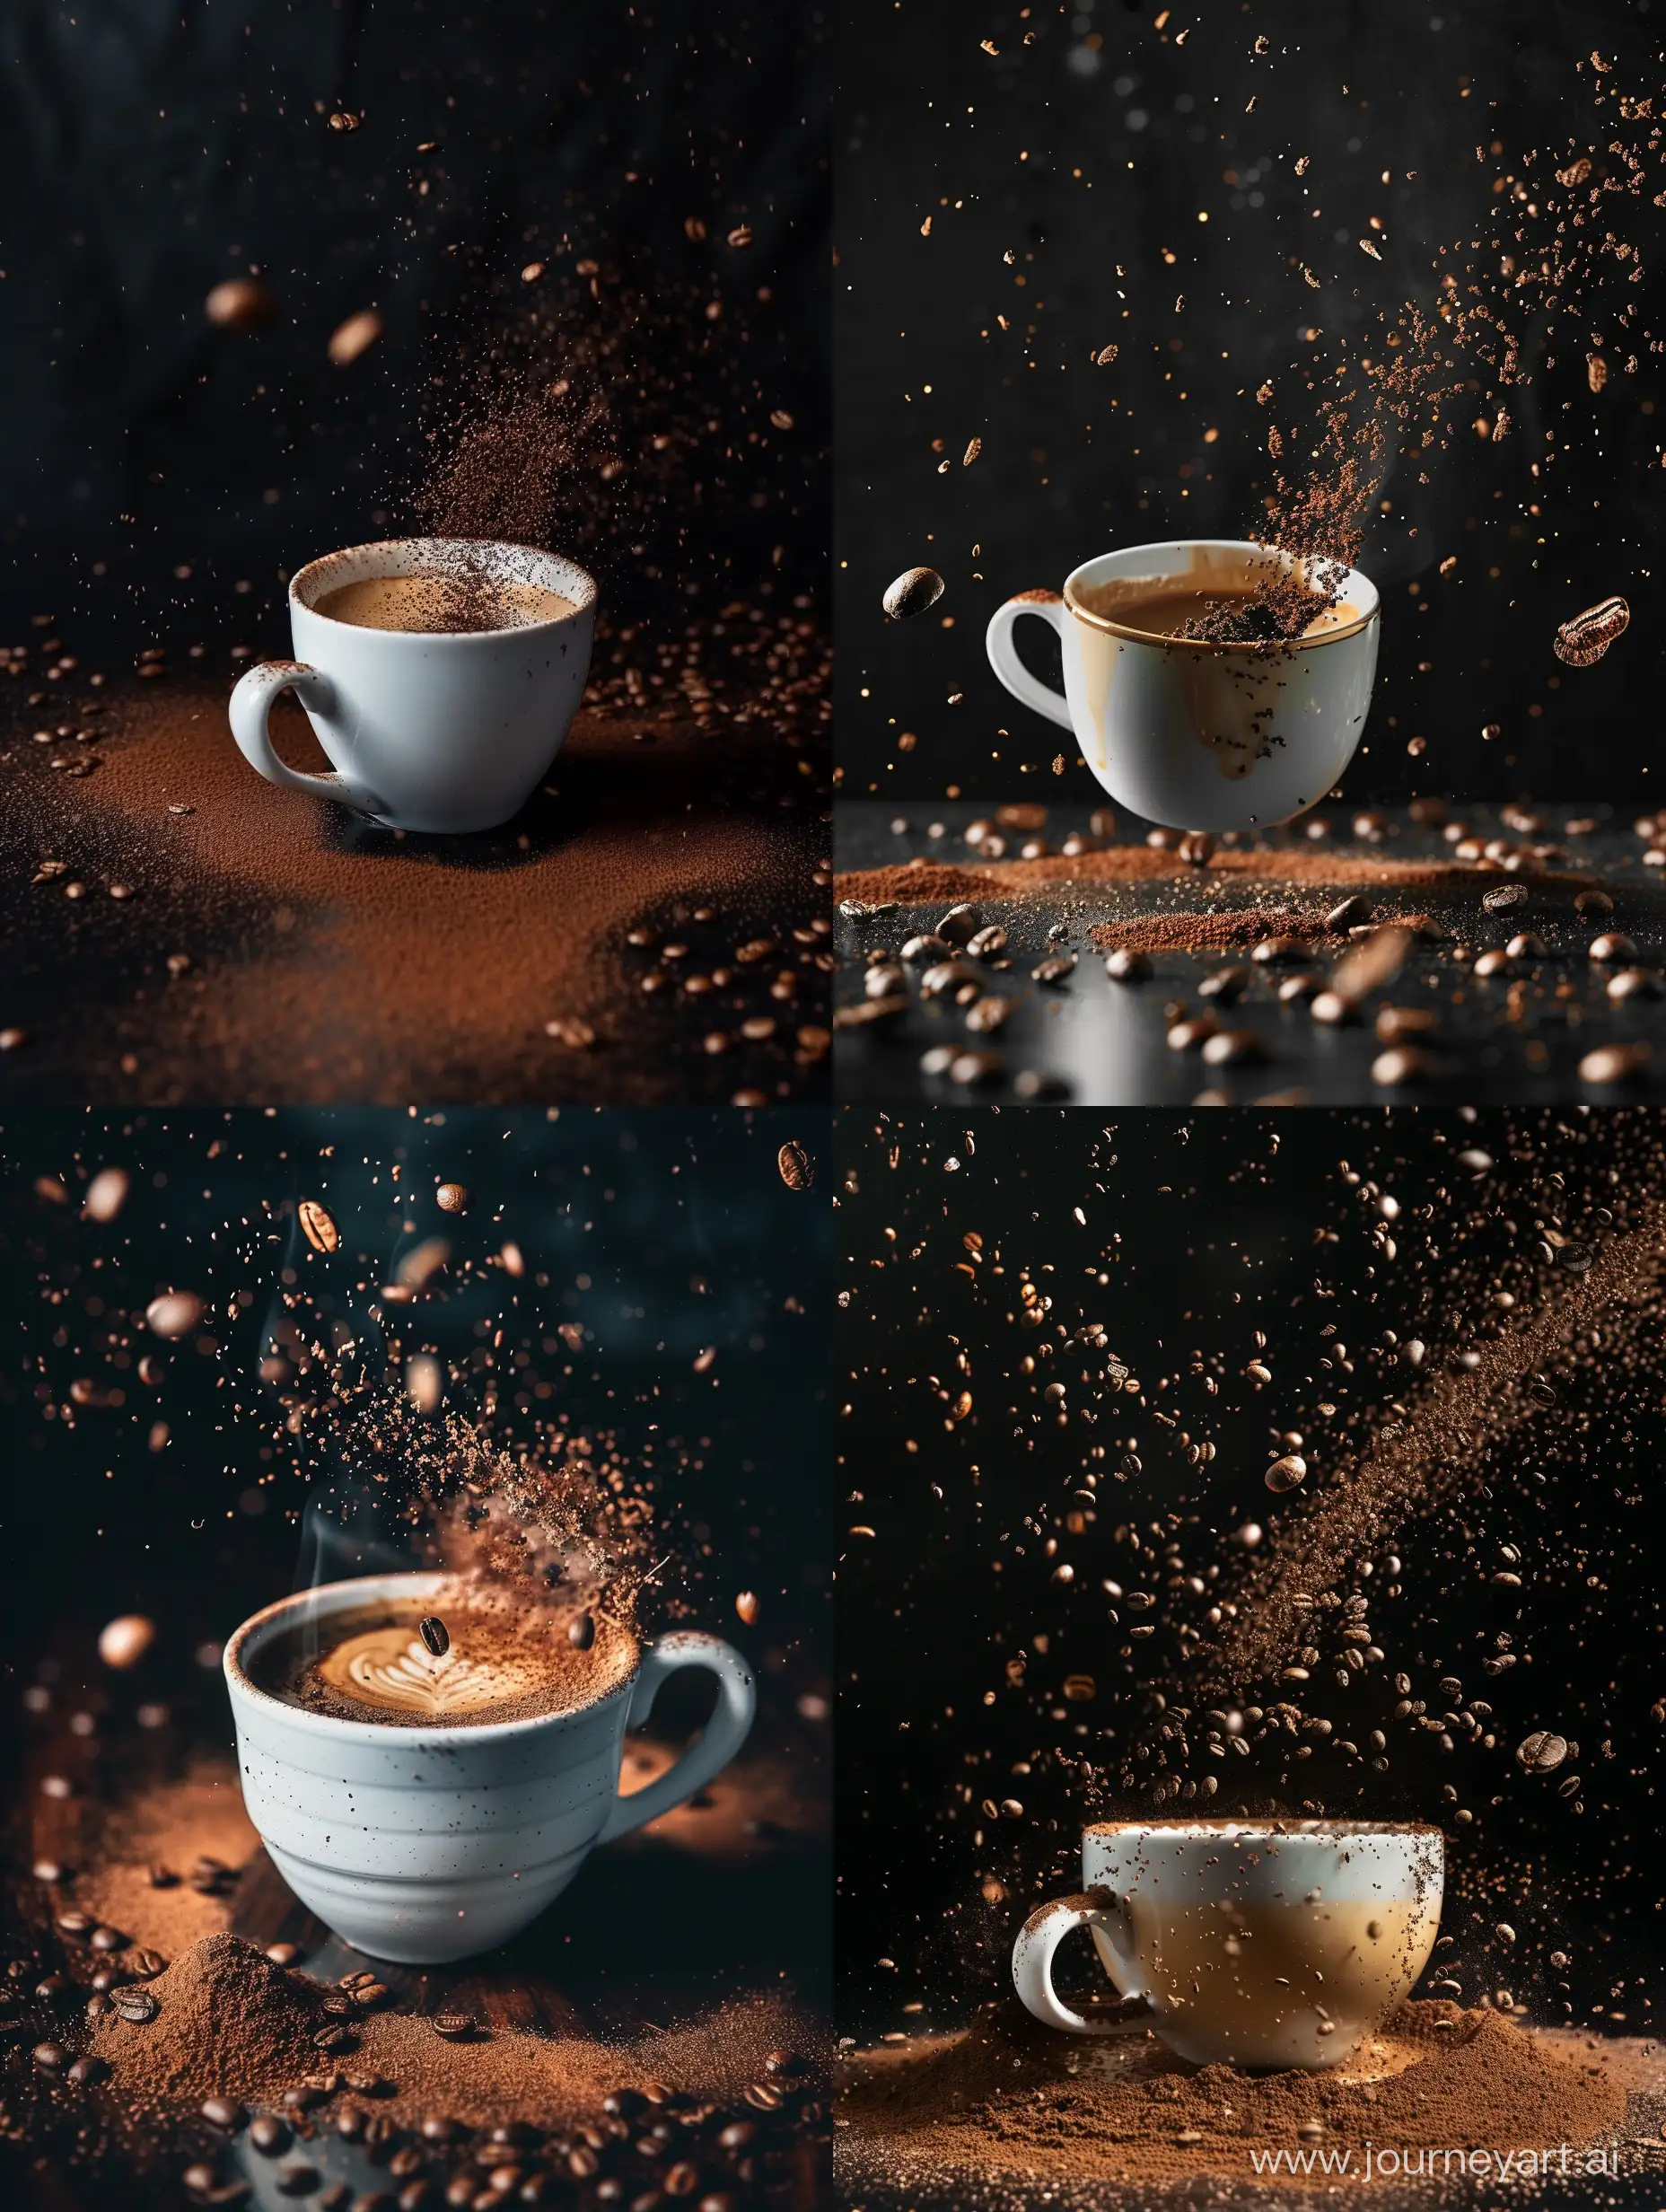 A cup of coffee with coffee grounds flying in the air